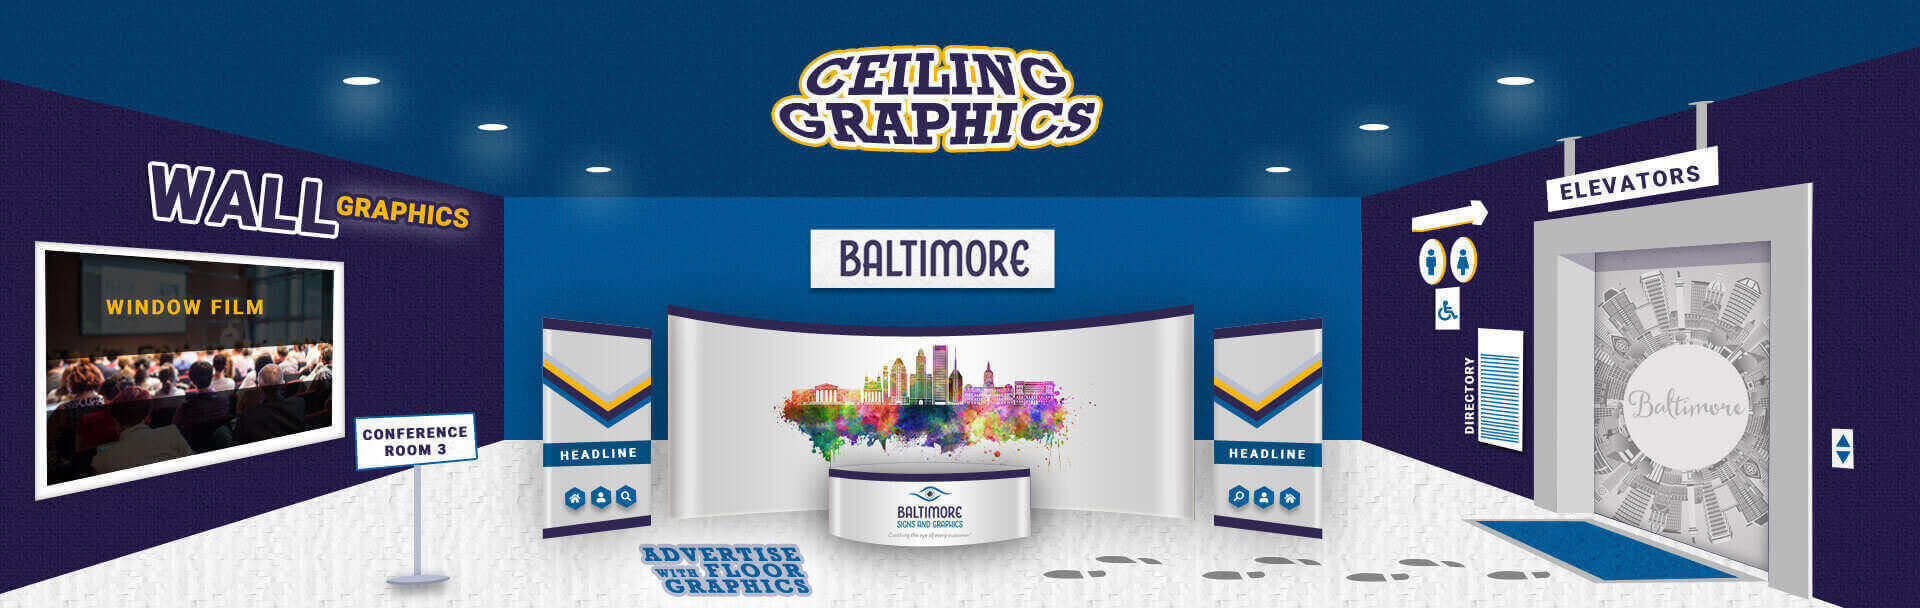 Baltimore Signs and Graphics Indoor Banner